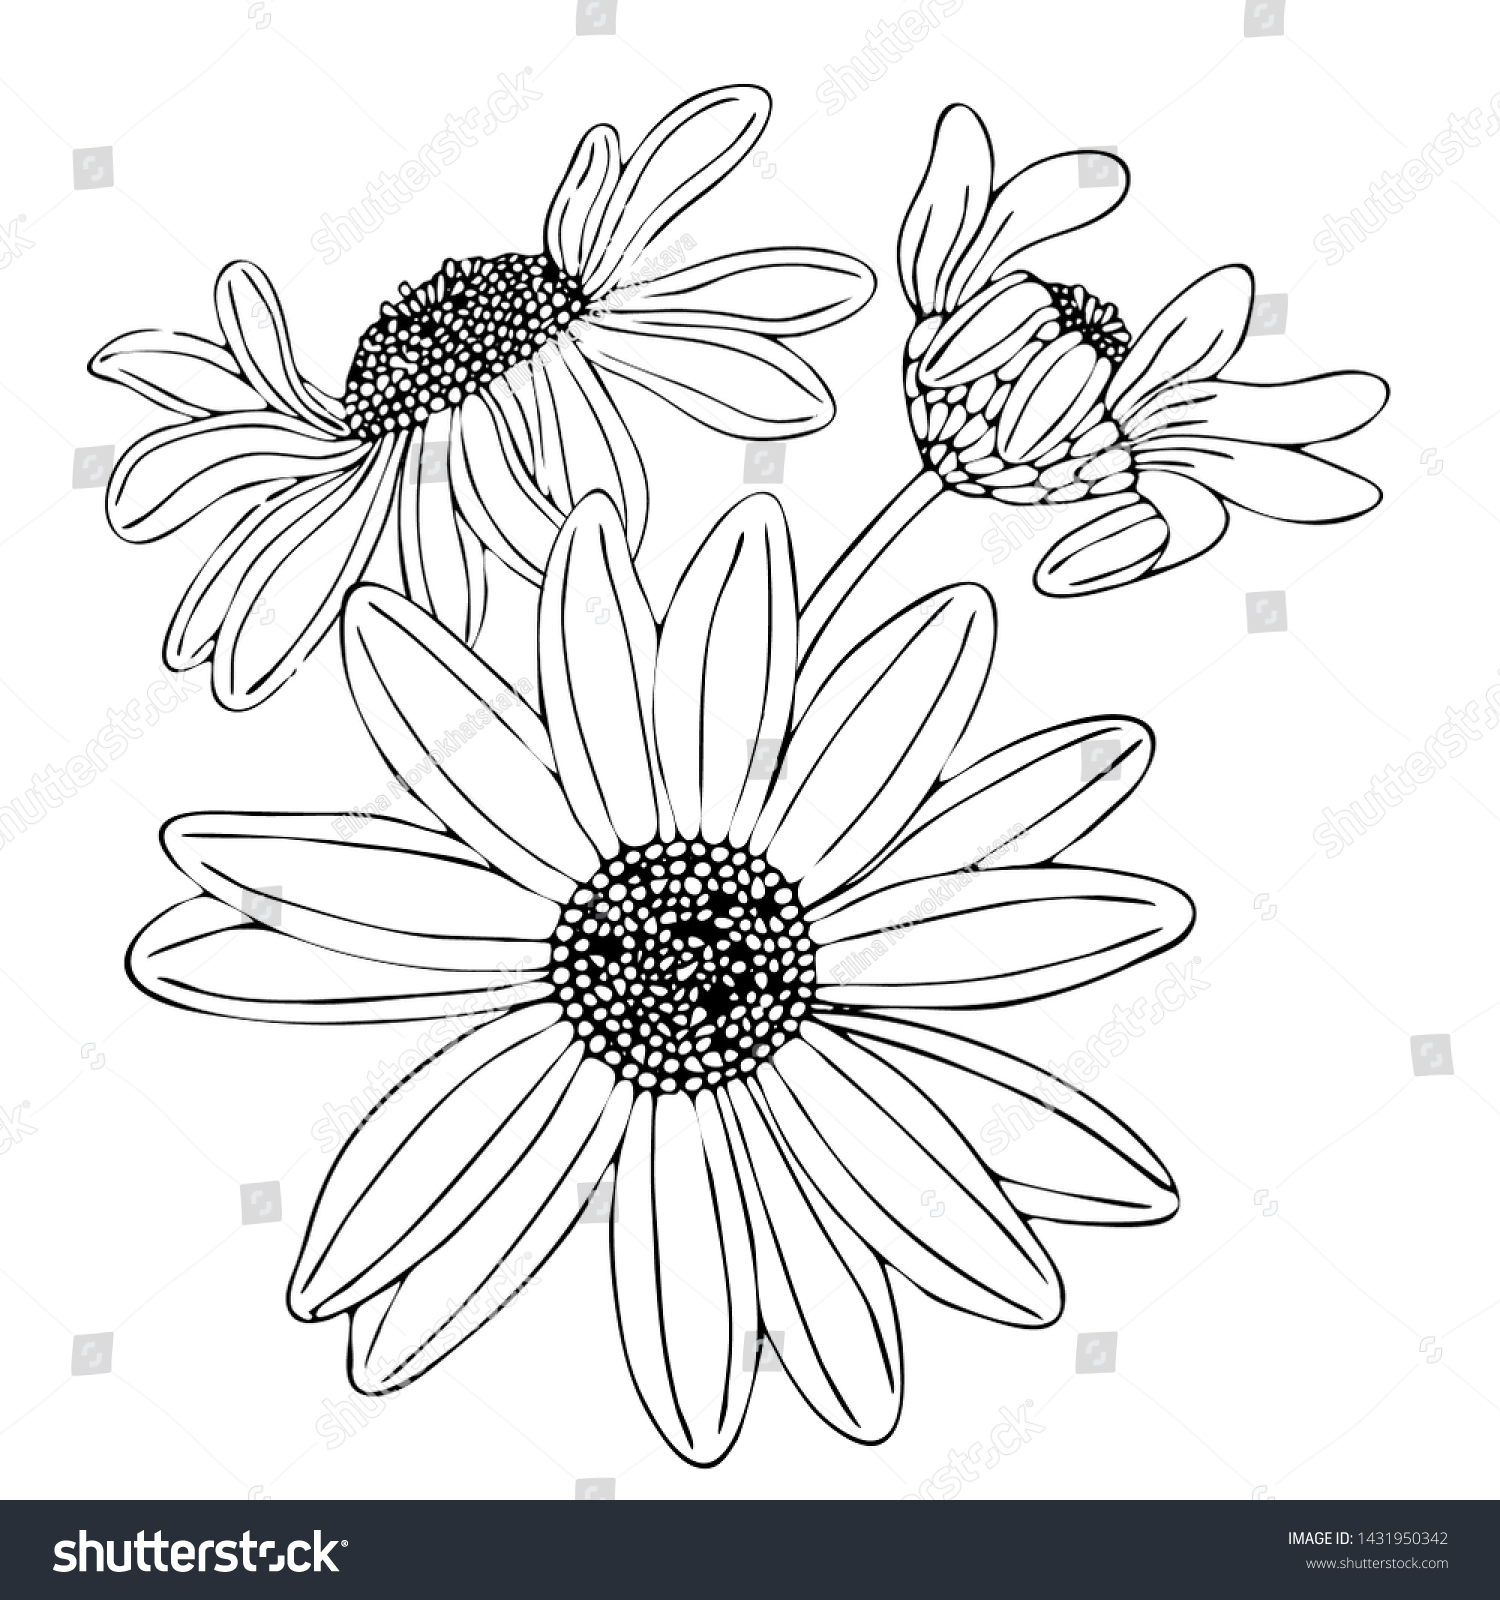 Floral Coloring Template Black Line Flower Stock Vector Royalty ...